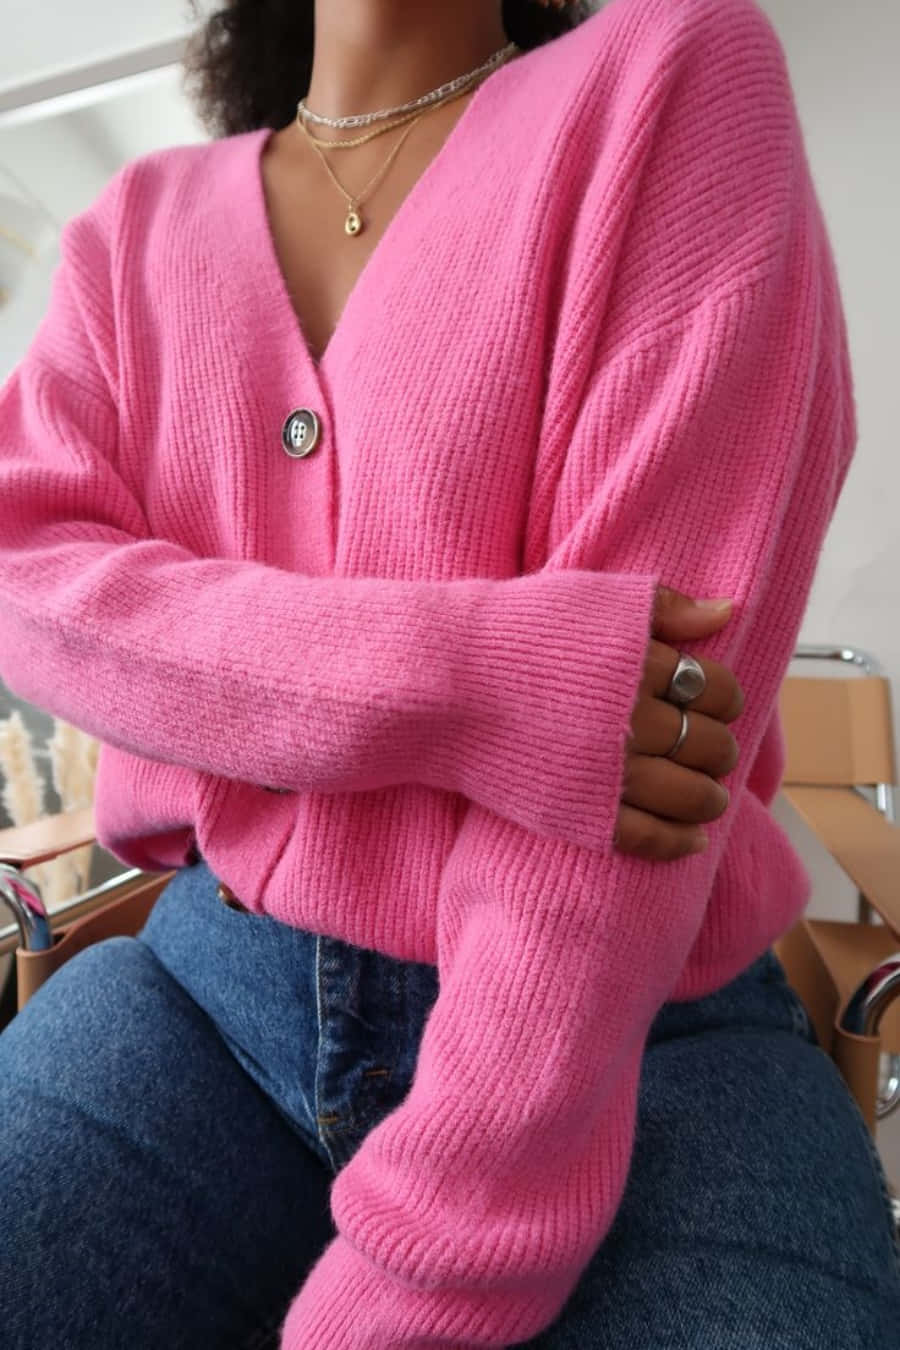 Stylish Pink Sweater on a Hanger Wallpaper